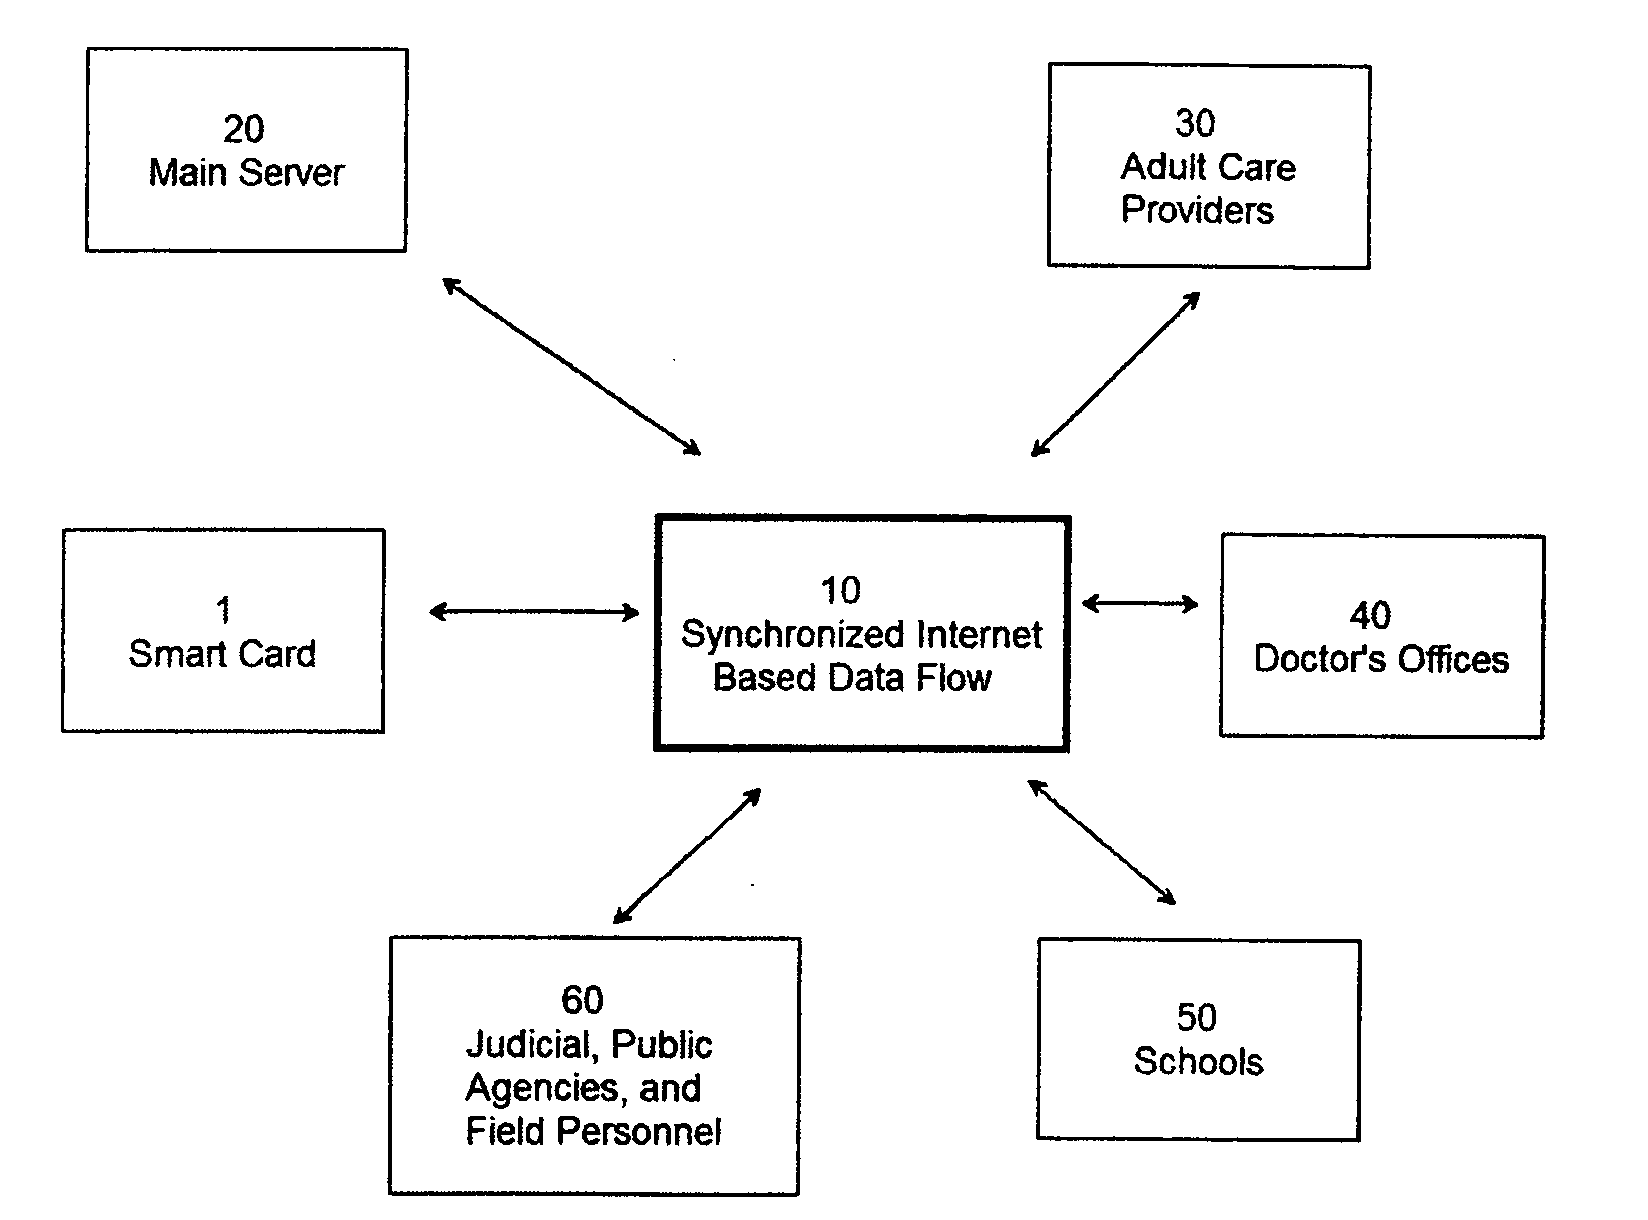 Real-time status and event monitoring system for foster children with various user levels of access